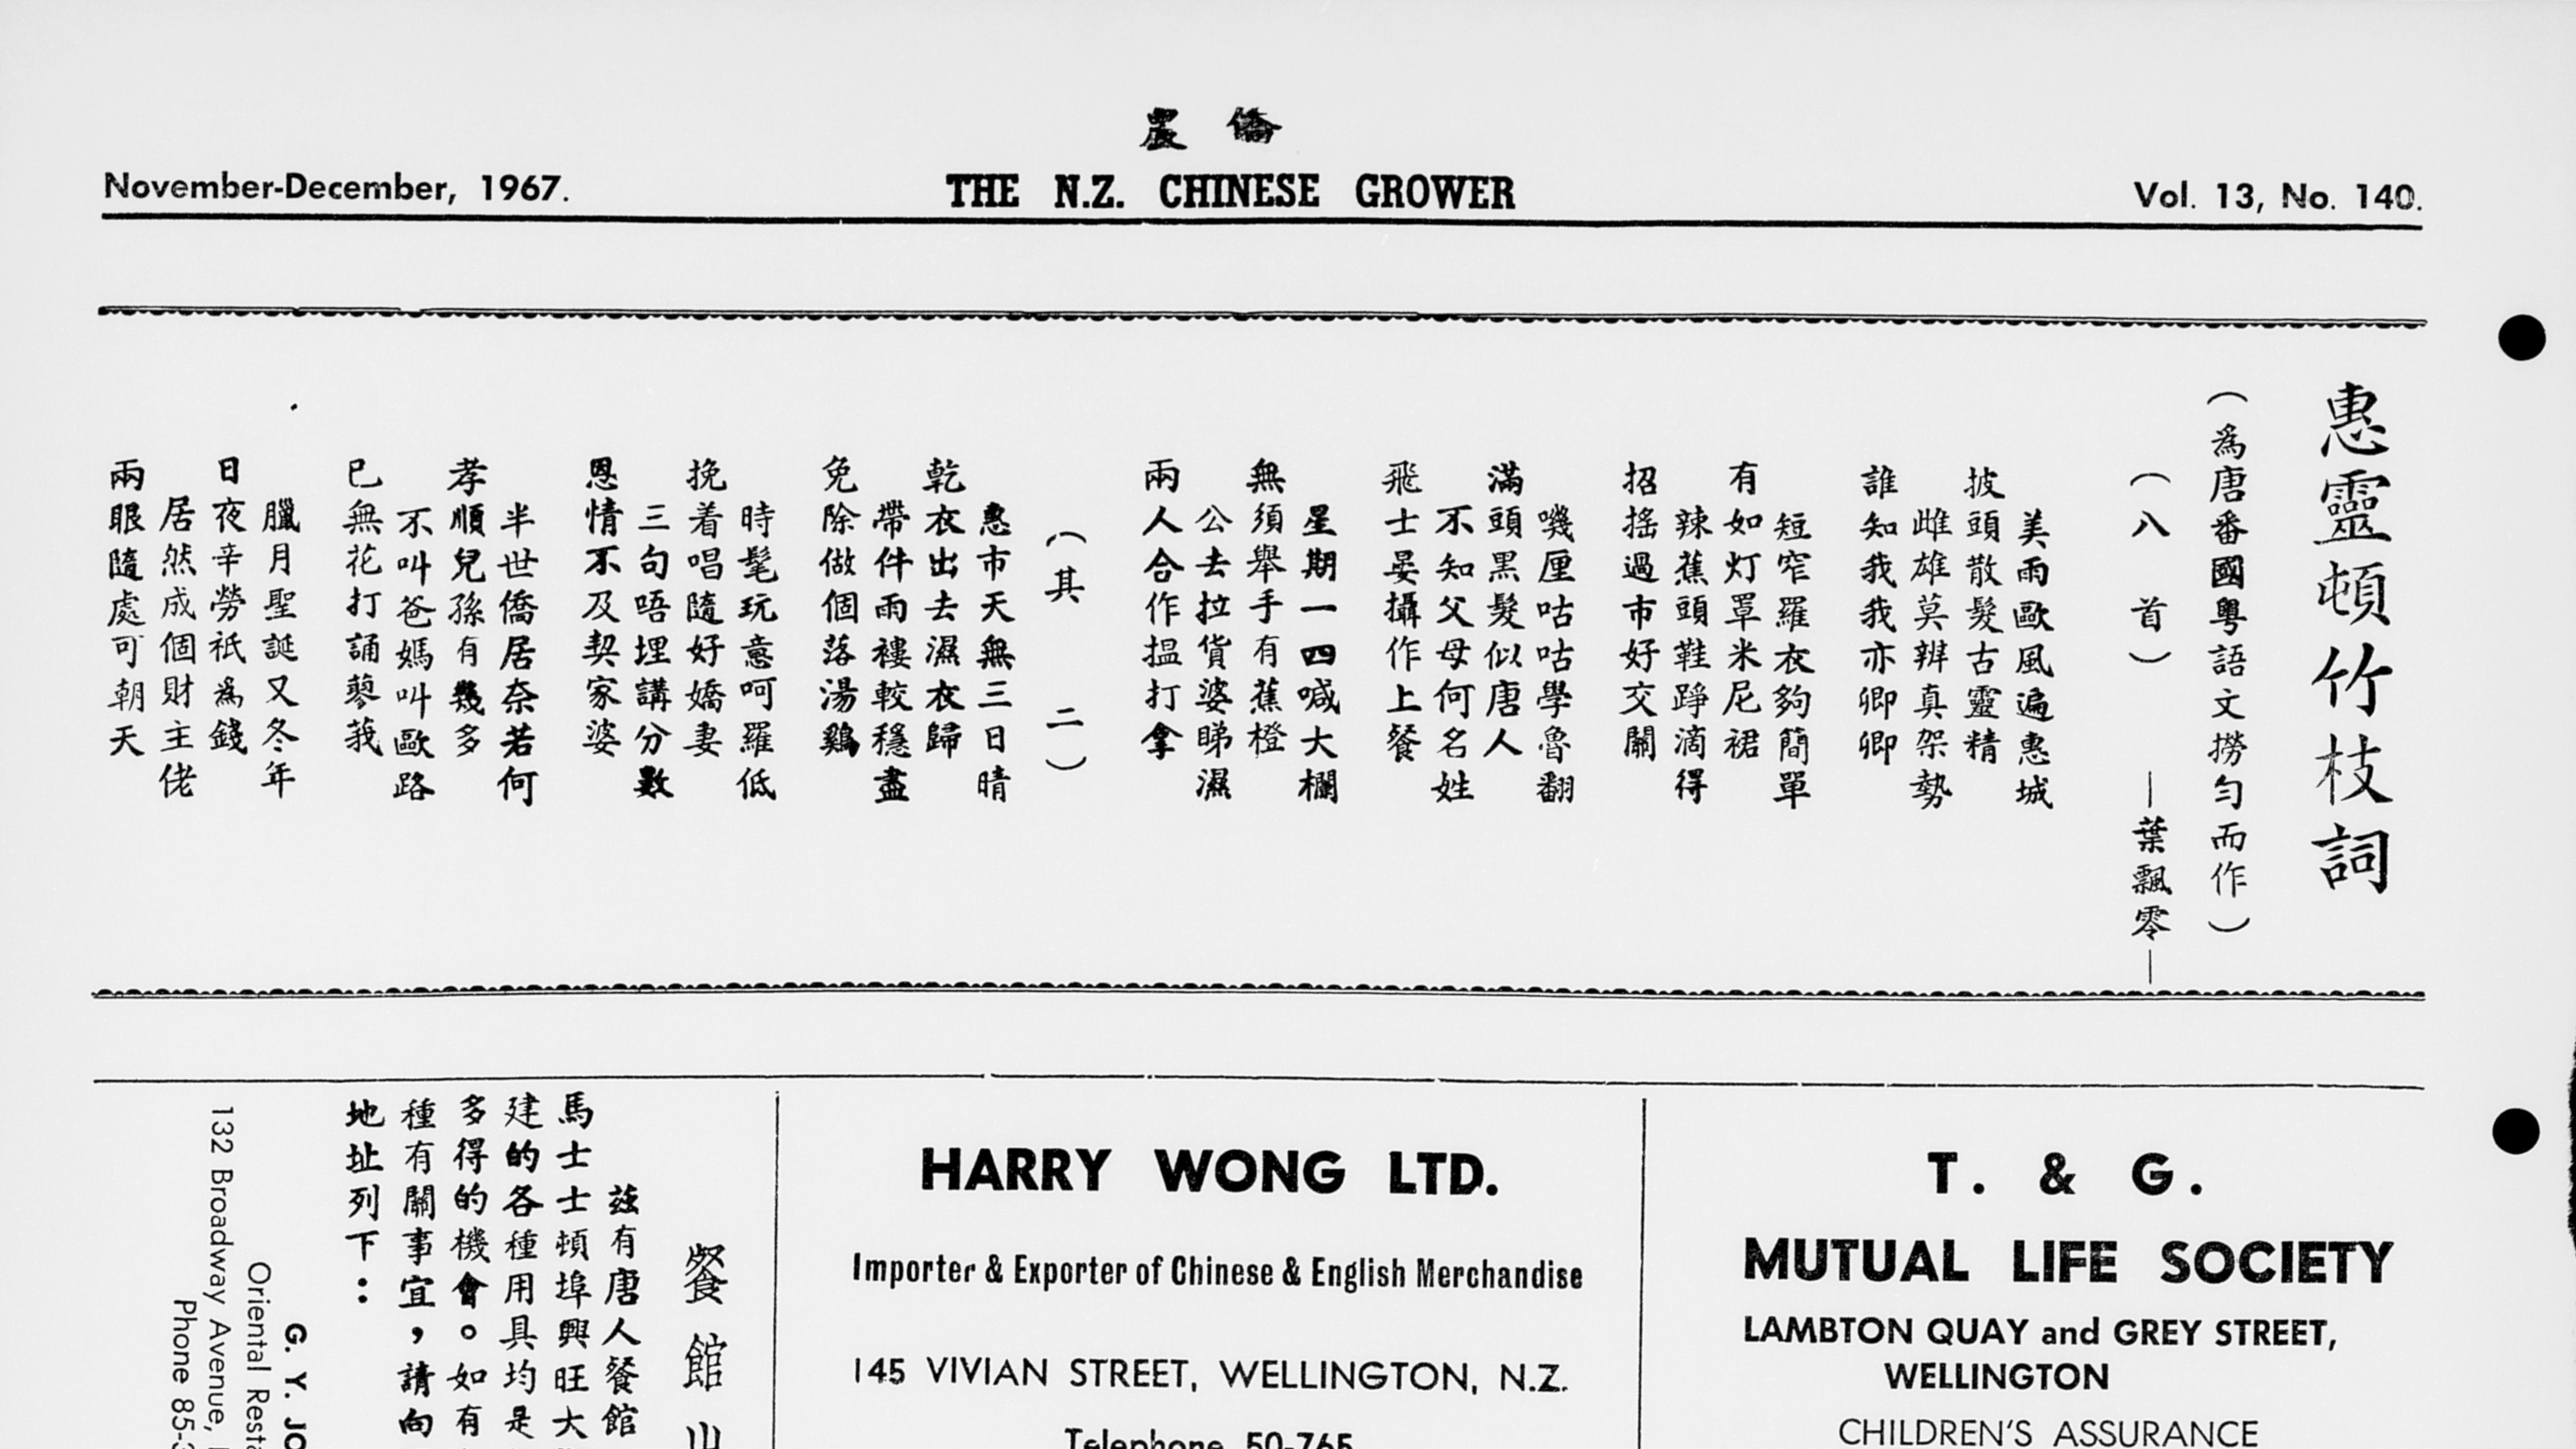 Excerpted detail of the first Wellington Bamboo Branch Songs published in the Chinese Growers Journal (vol 13, no.140 Nov-Dec 1967)